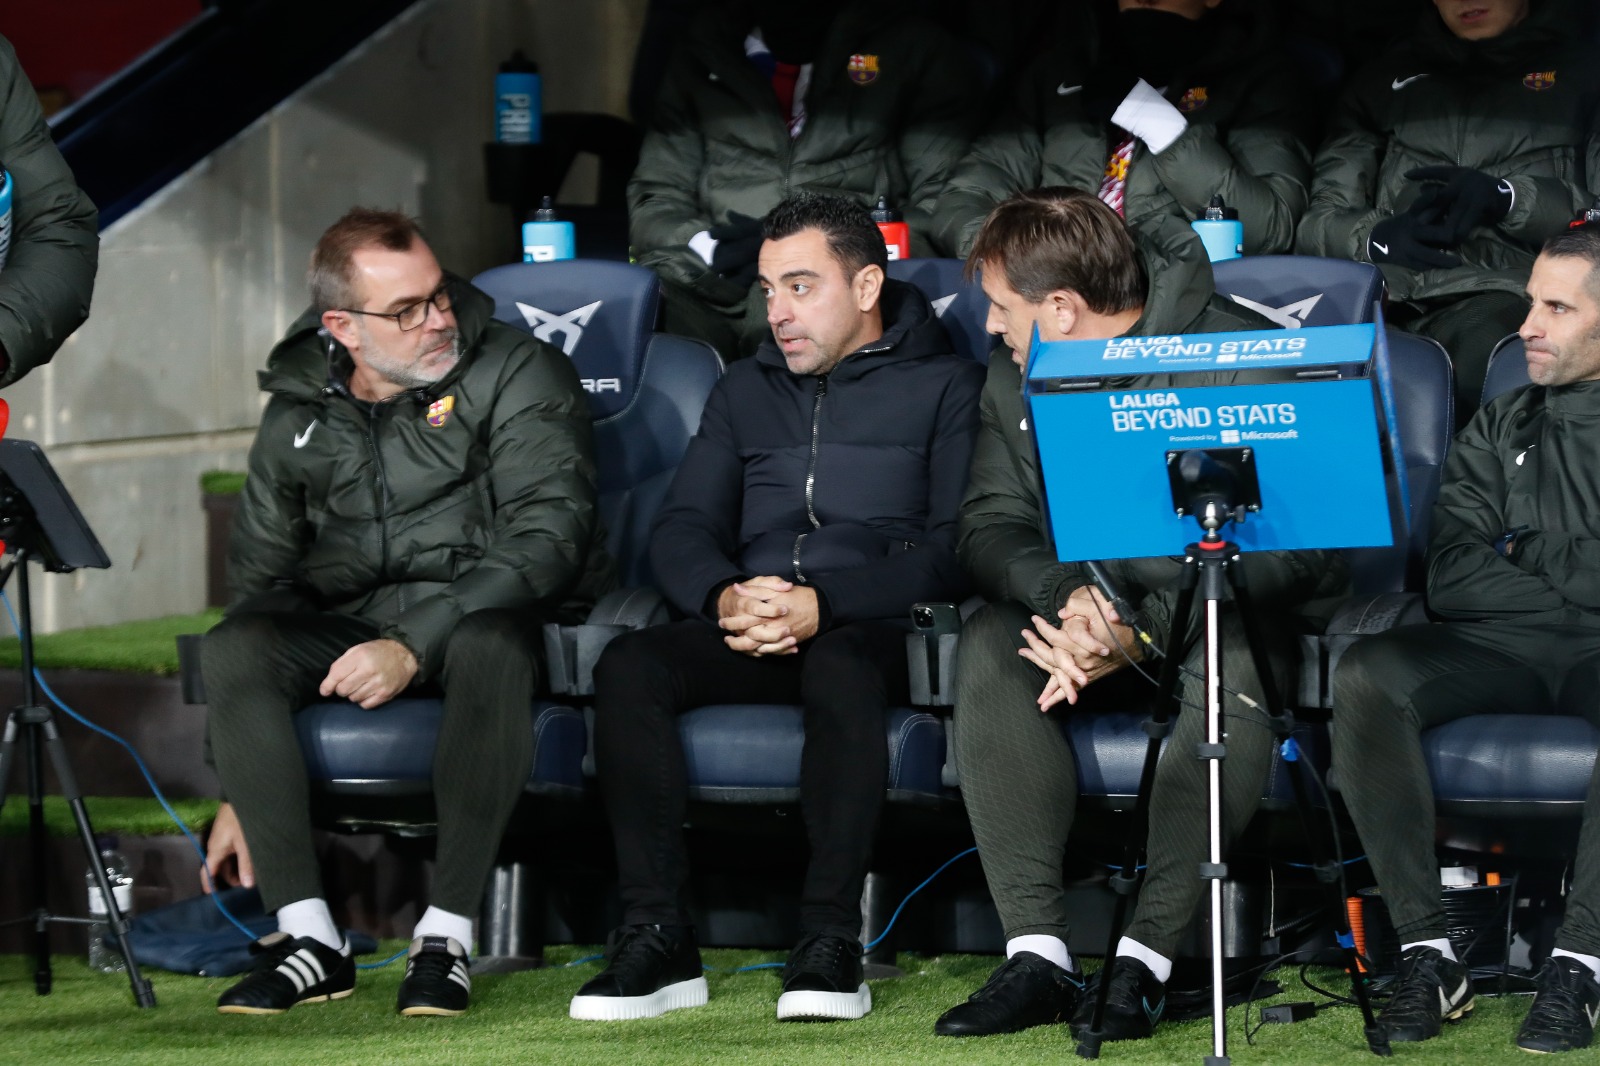 Xavi Hernandez continuity at Barcelona would require changes amongst coaching staff